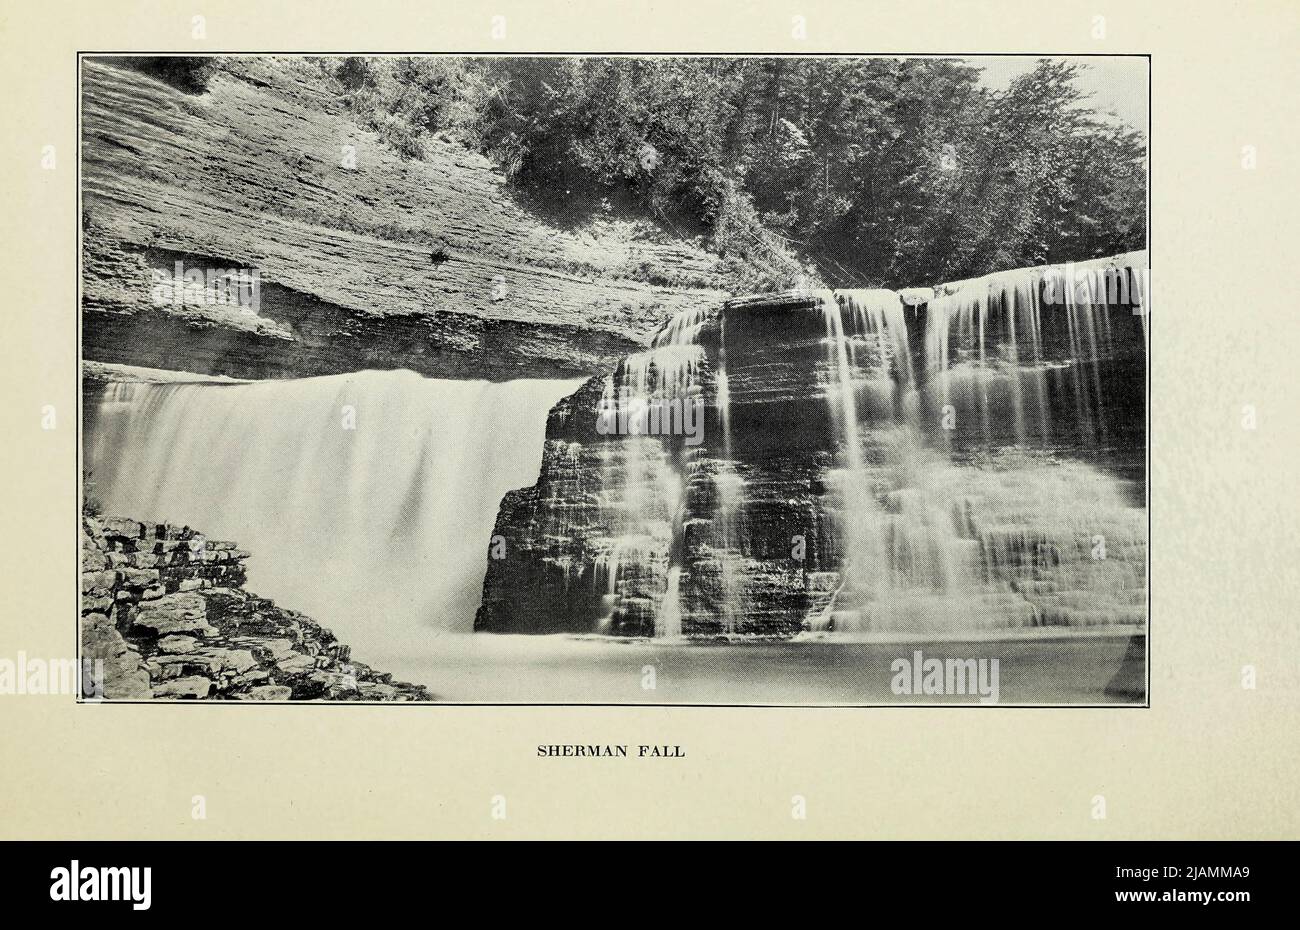 Sherman Fall from the book ' The golden era of Trenton Falls ' by Charlotte Agnes Uhlein Pitcher, Publication date 1915 Publisher Utica, N.Y. : C.A. Pitcher Describes the beauty of Trenton Falls prior to its damming by a power company and provides numerous descriptions by visitors to the spectacular Falls [Trenton Falls is a waterfall on West Canada Creek[1] in Trenton, New York. Scenic trails were developed by Brookfield Renewable Power and the Town of Trenton. The falls was and used to produce hydro generated electricity beginning in the early twentieth century, and continues to do so today. Stock Photo